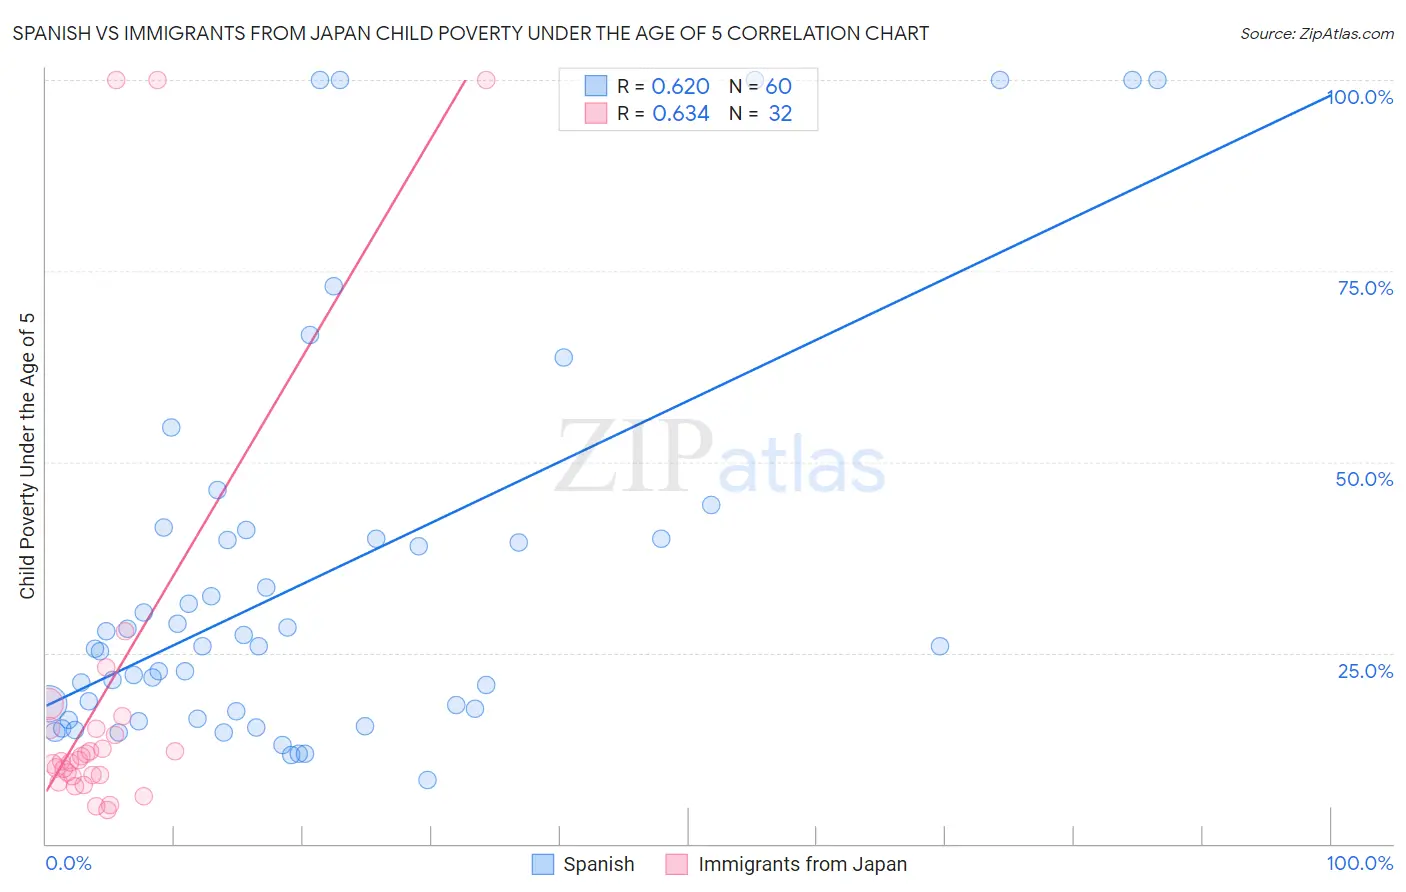 Spanish vs Immigrants from Japan Child Poverty Under the Age of 5